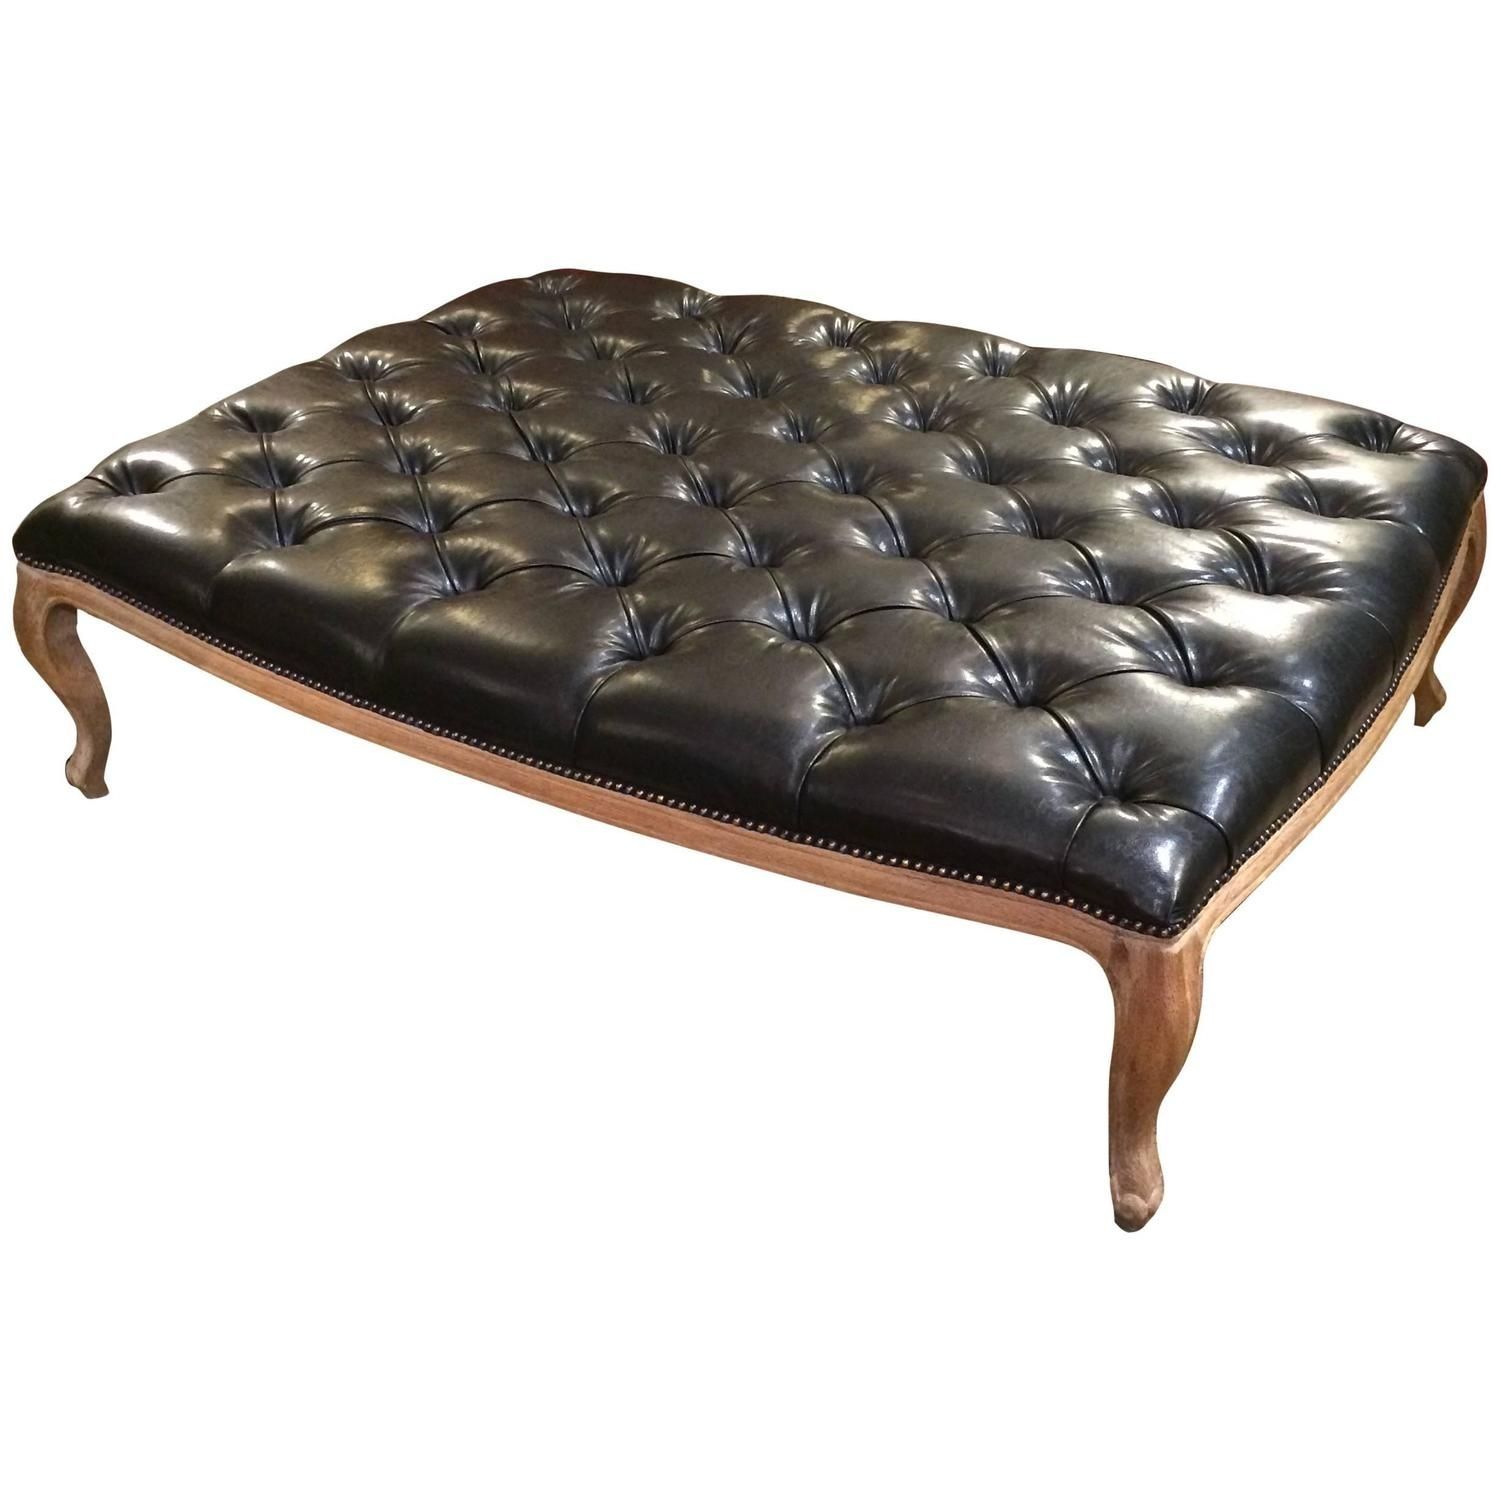 Oversized Leather Ottoman | Very Large Button Tufted Black Faux With Regard To Button Tufted Coffee Tables (View 13 of 30)